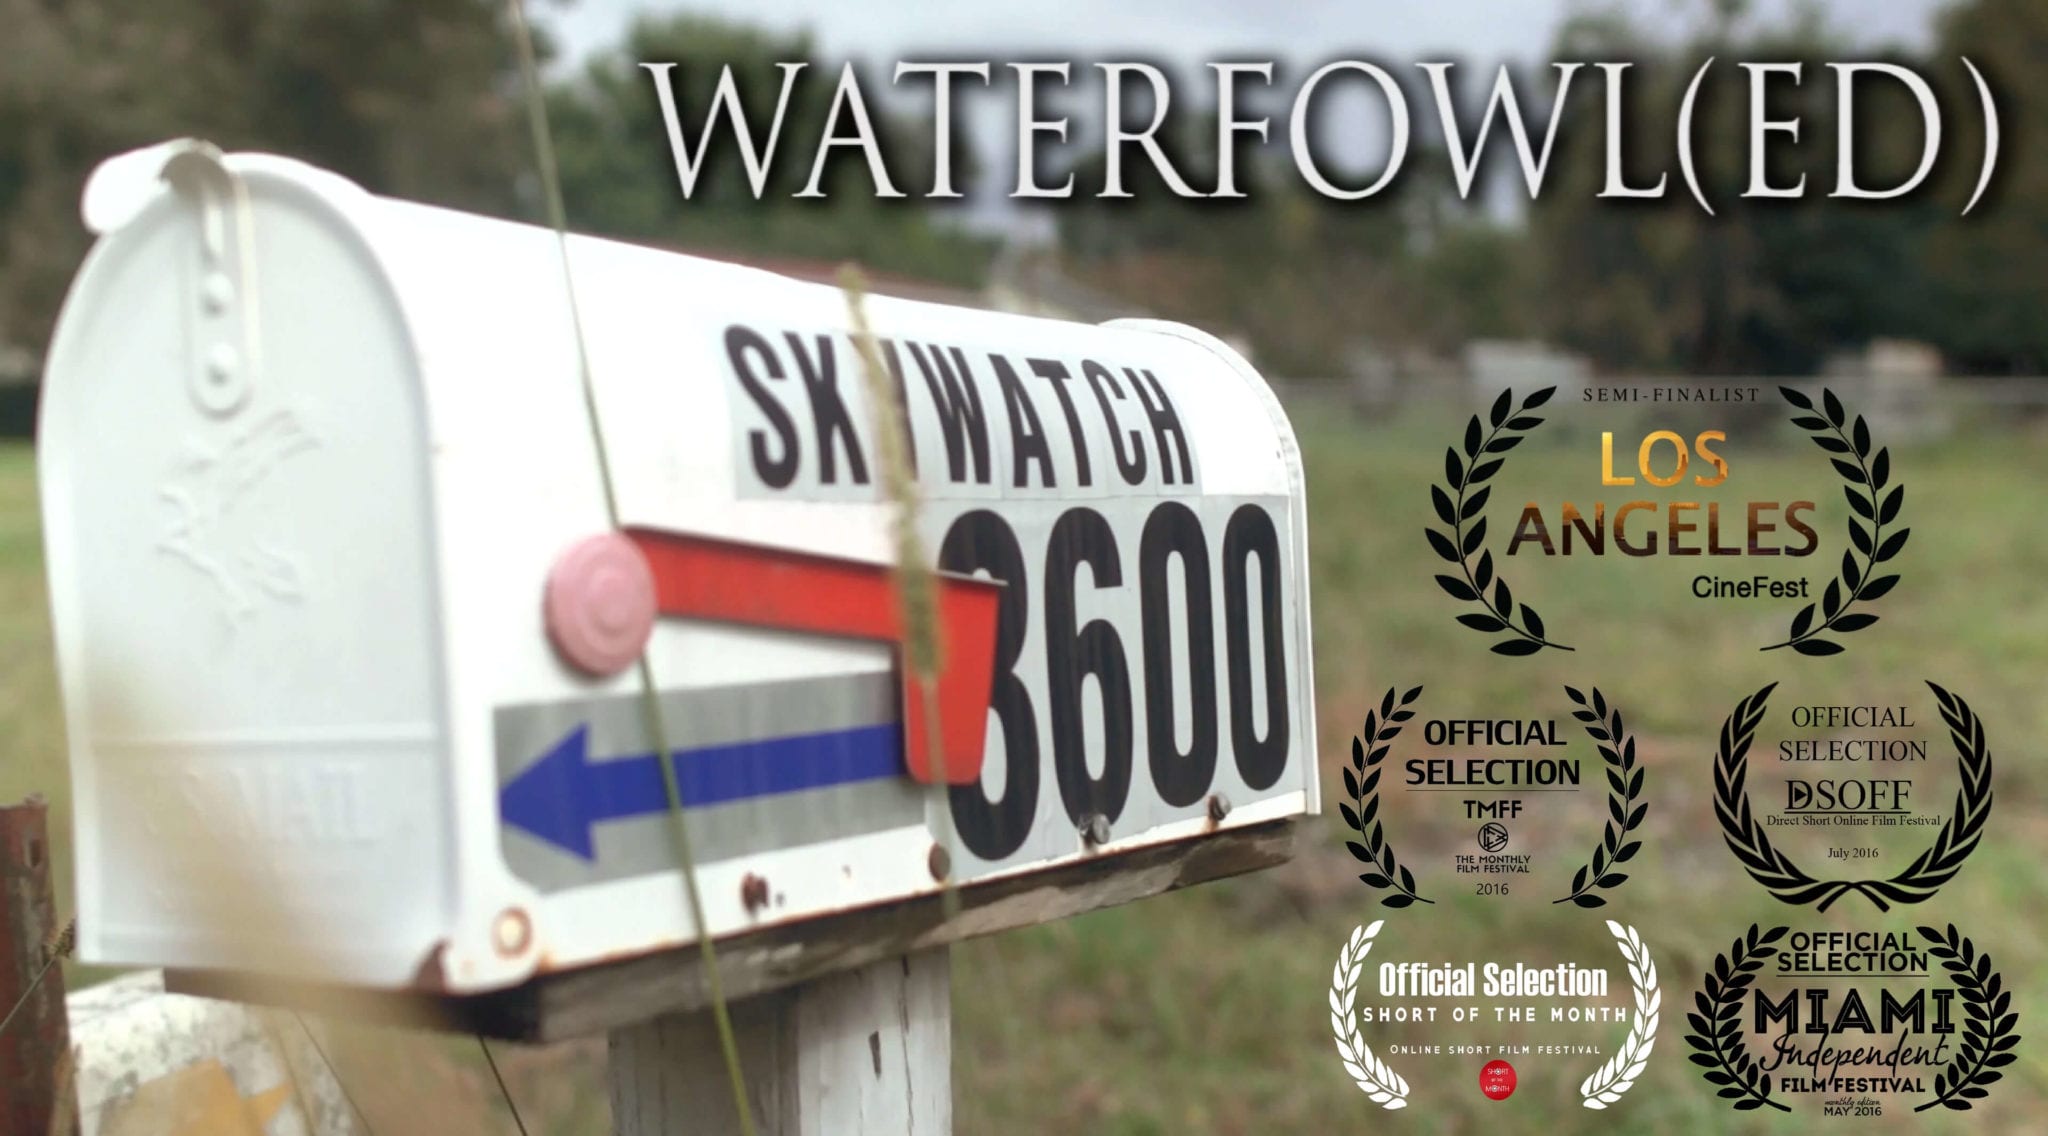 Waterfowl(ed) - Short of the Month - Online Short Film Festival May 2016 - Featured